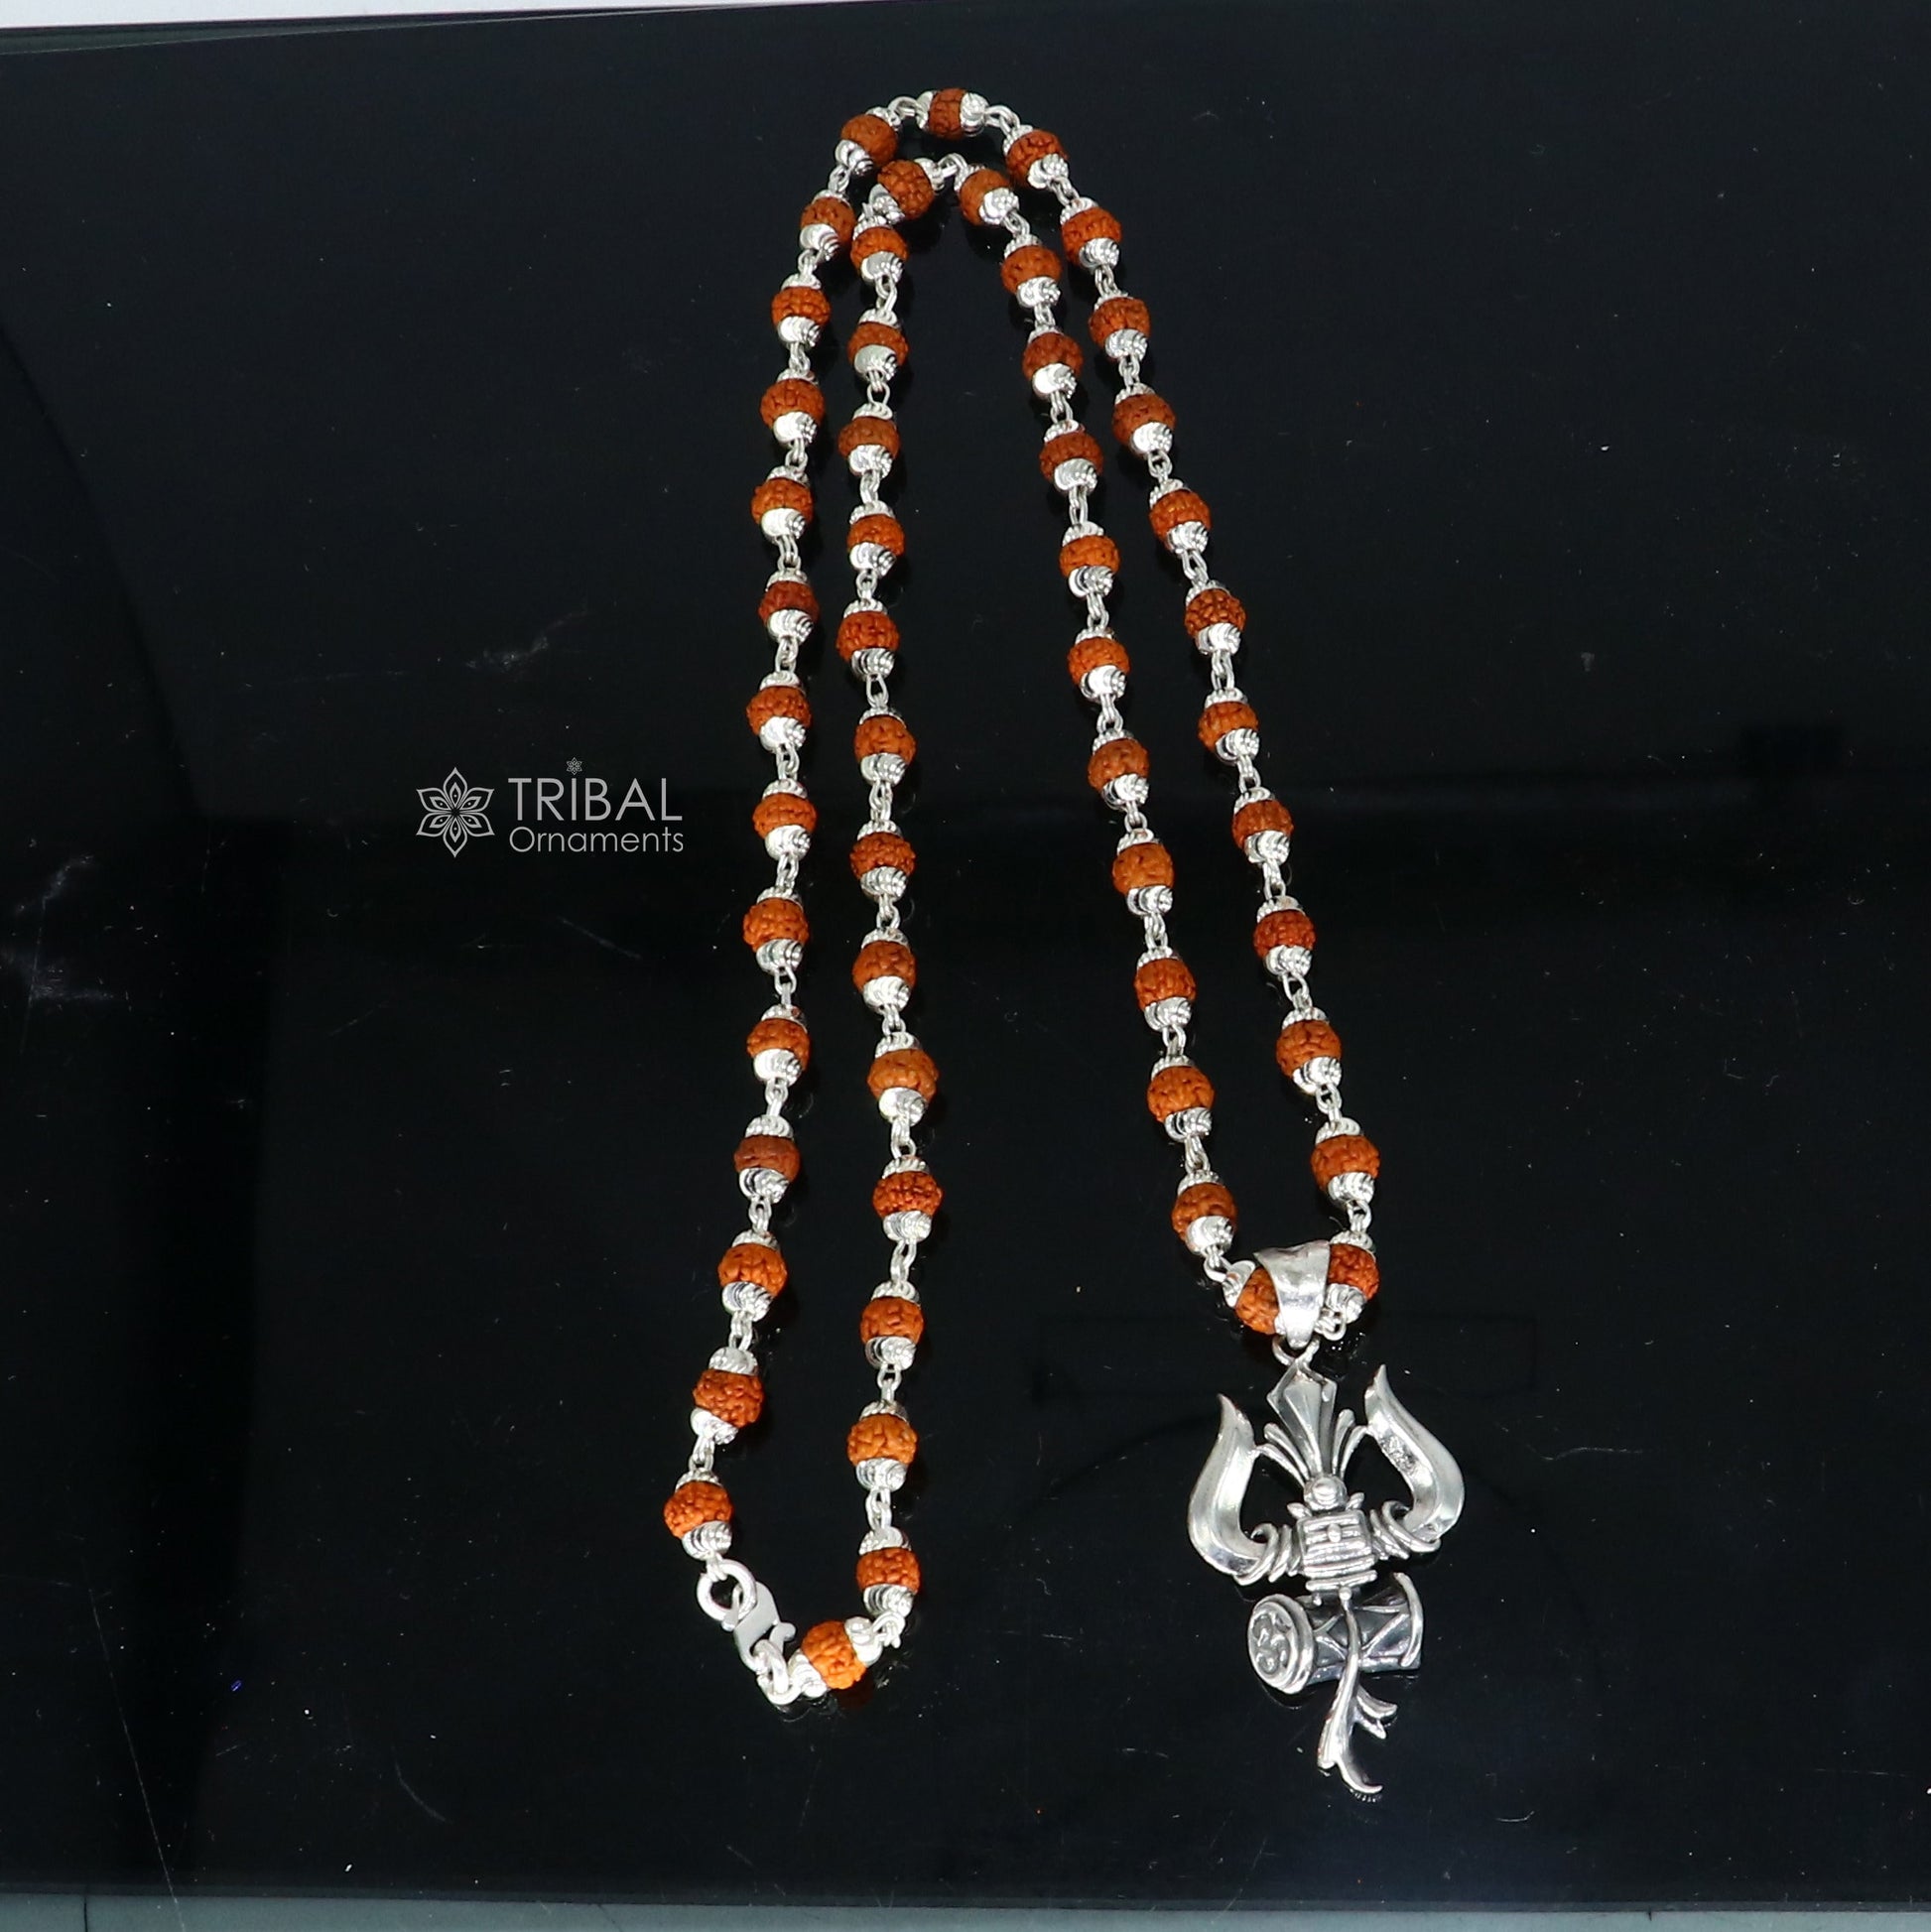 925 sterling silver handmade Divine Lord shiva trident pendant & Rudraksha chain, holy pendant protect from negative energy nsp757 - TRIBAL ORNAMENTS